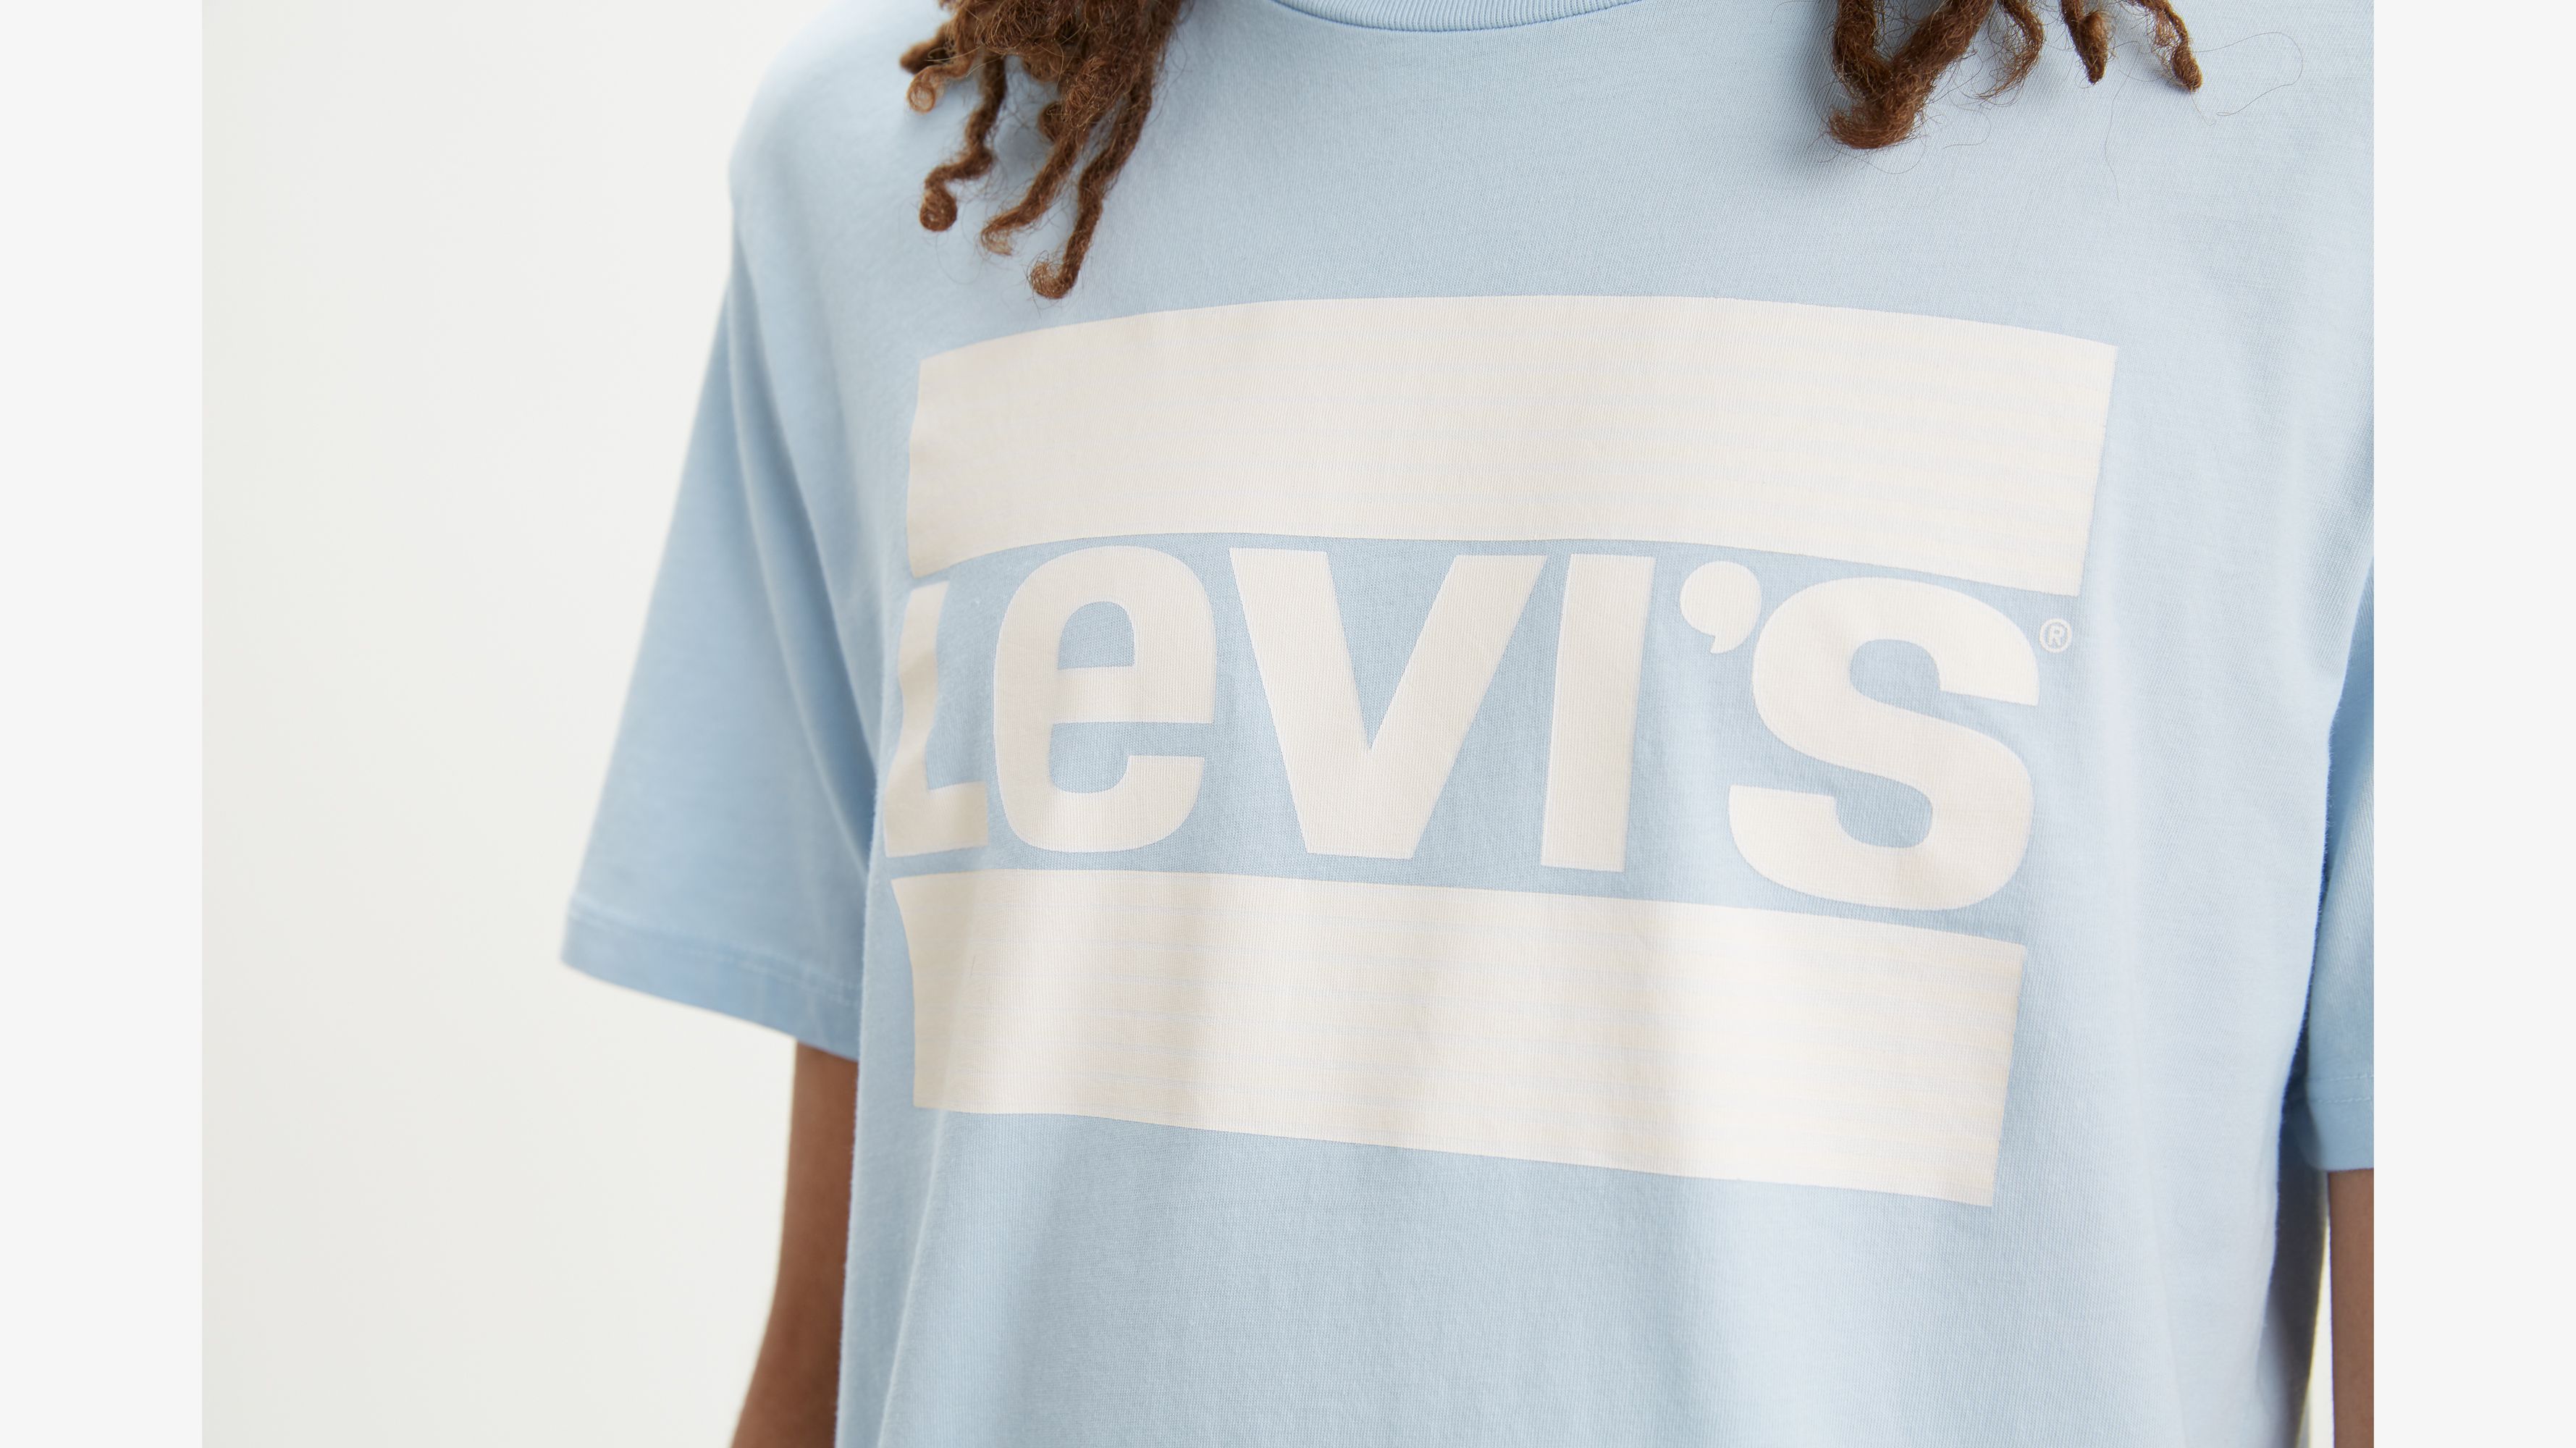 Levi's T-Shirt Blue Sportswear Logo New with Tags size XS S M FREE SHIPPING 